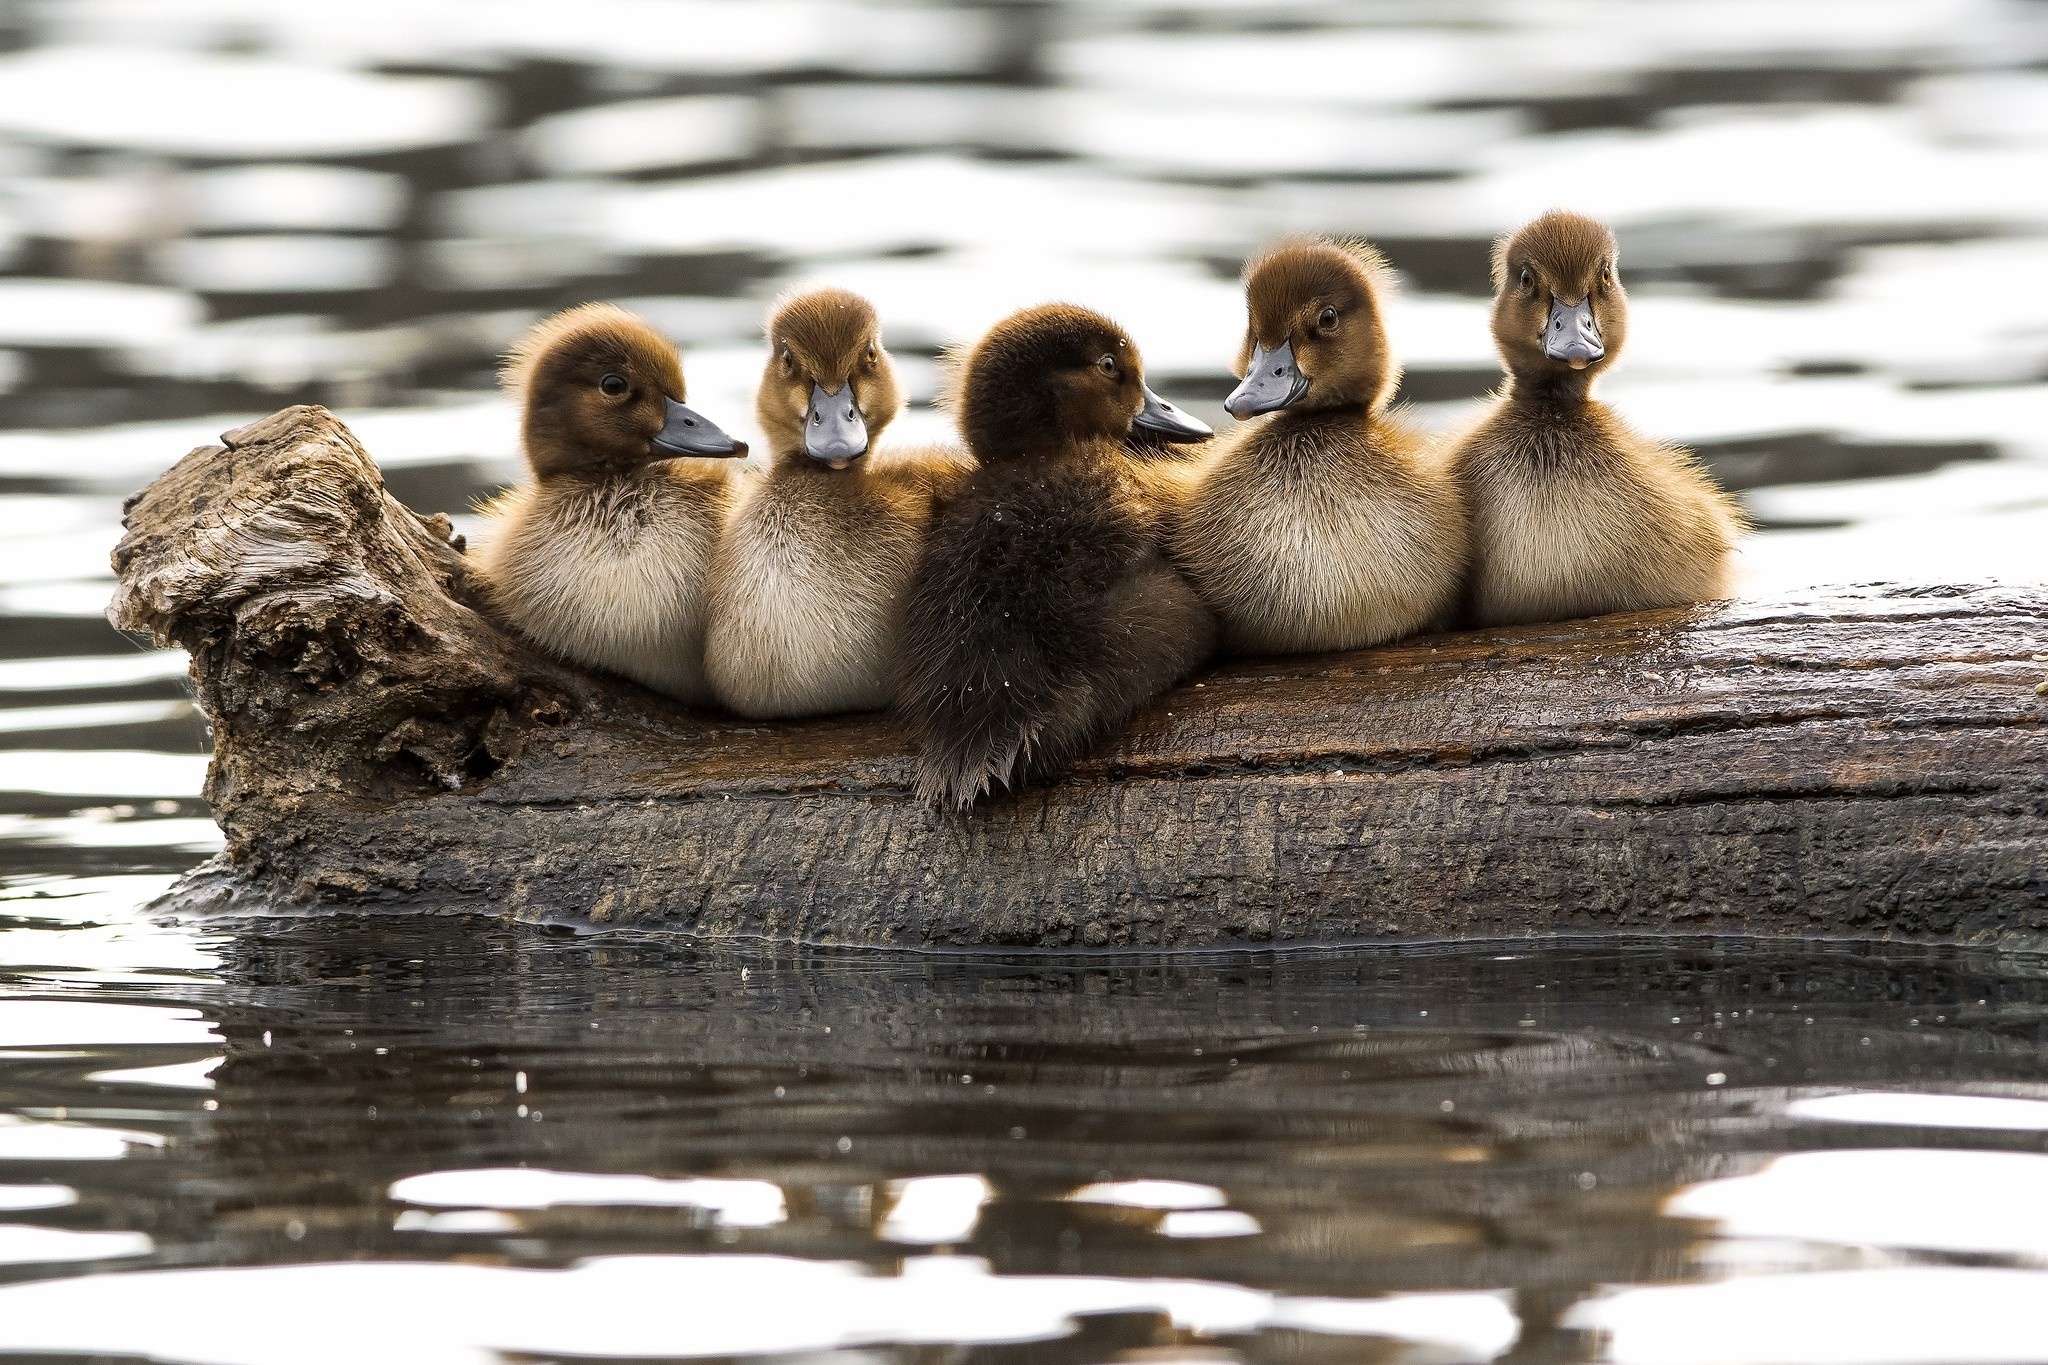 Duckling wallpaper collection, Adorable baby ducks, Cute and fluffy, Feathered friends, 2050x1370 HD Desktop